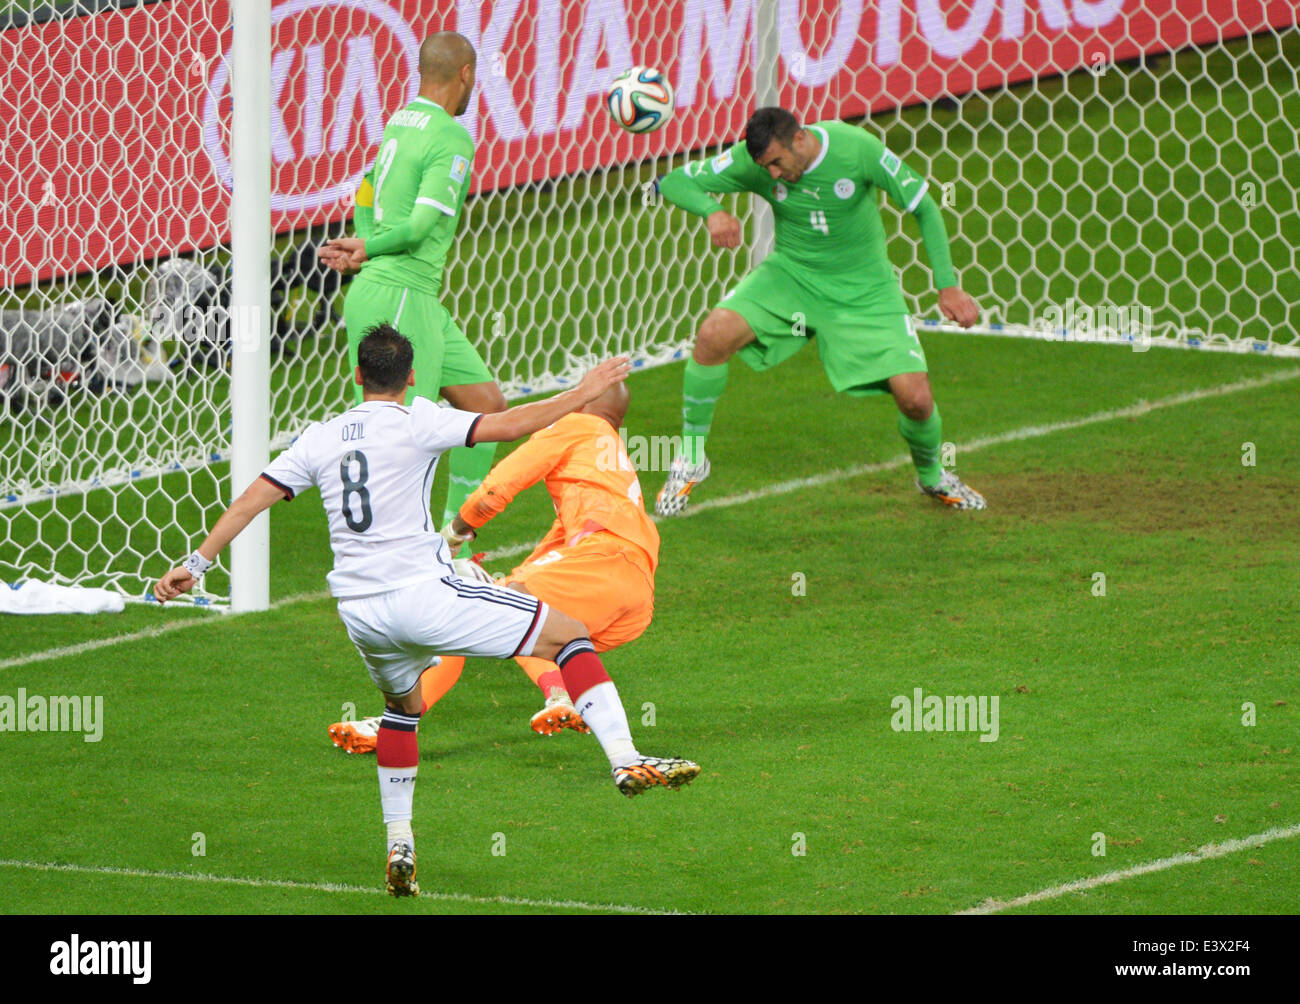 Porto Alegre, Brazil. 30th June, 2014. Germany's Mesut Oezil (L) scores the 2-0 against Algeria's goalkeeper Rais Mbolhi (C) during the FIFA World Cup 2014 round of 16 soccer match between Germany and Algeria at the Estadio Beira-Rio in Porto Alegre, Brazil, 30 June 2014. Photo: Thomas Eisenhuth/dpa/Alamy Live News Stock Photo